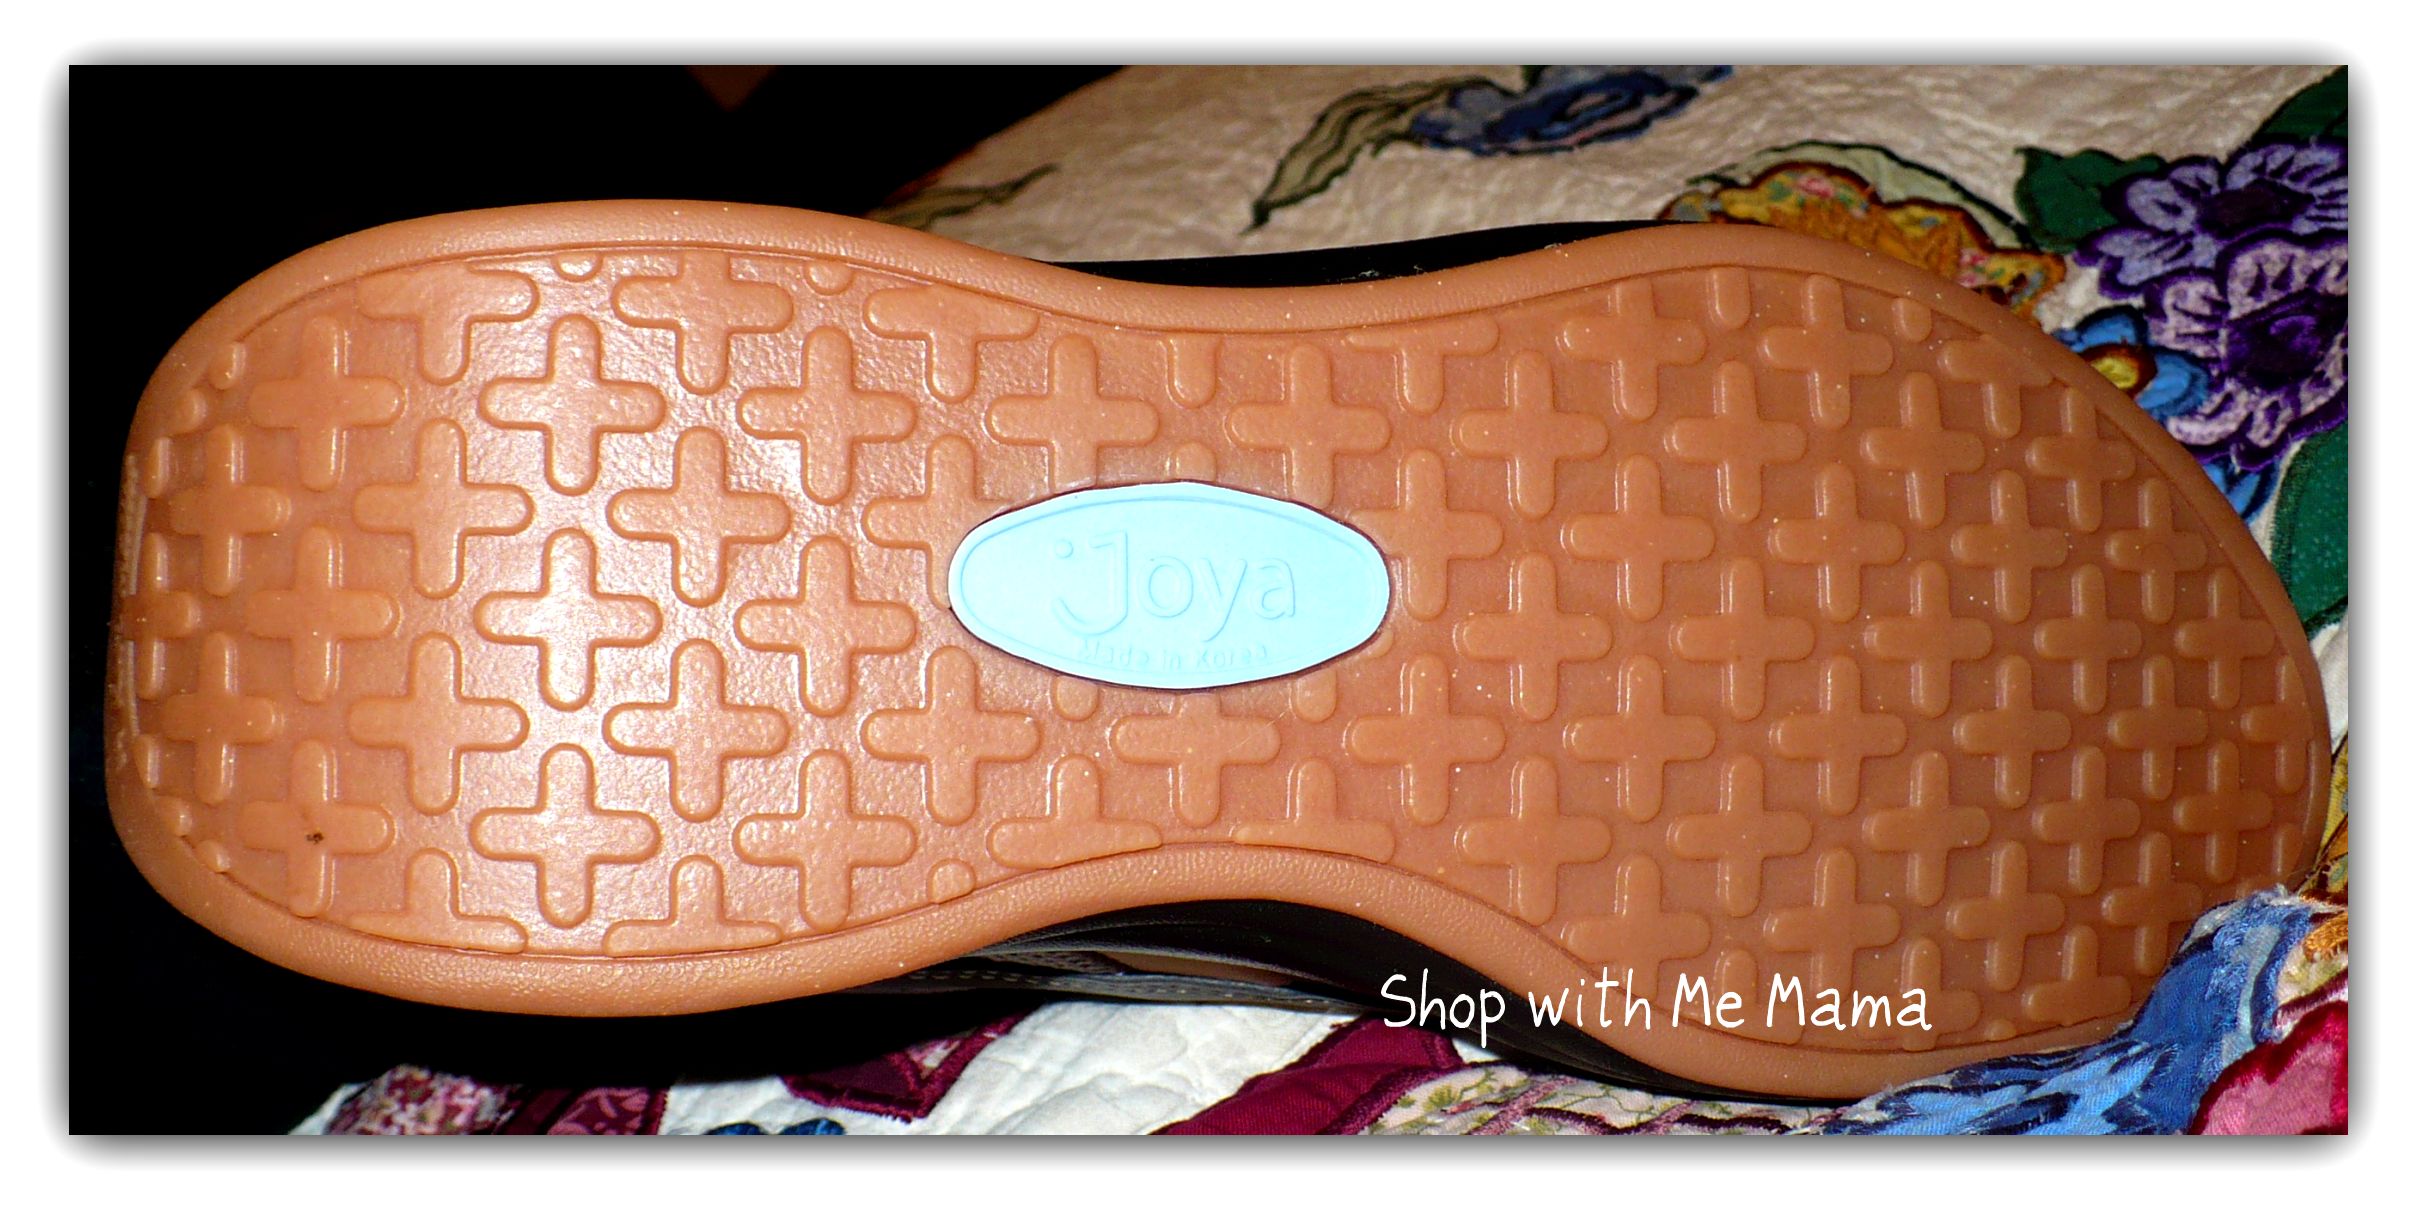 Joya-The Softest Shoes in The World